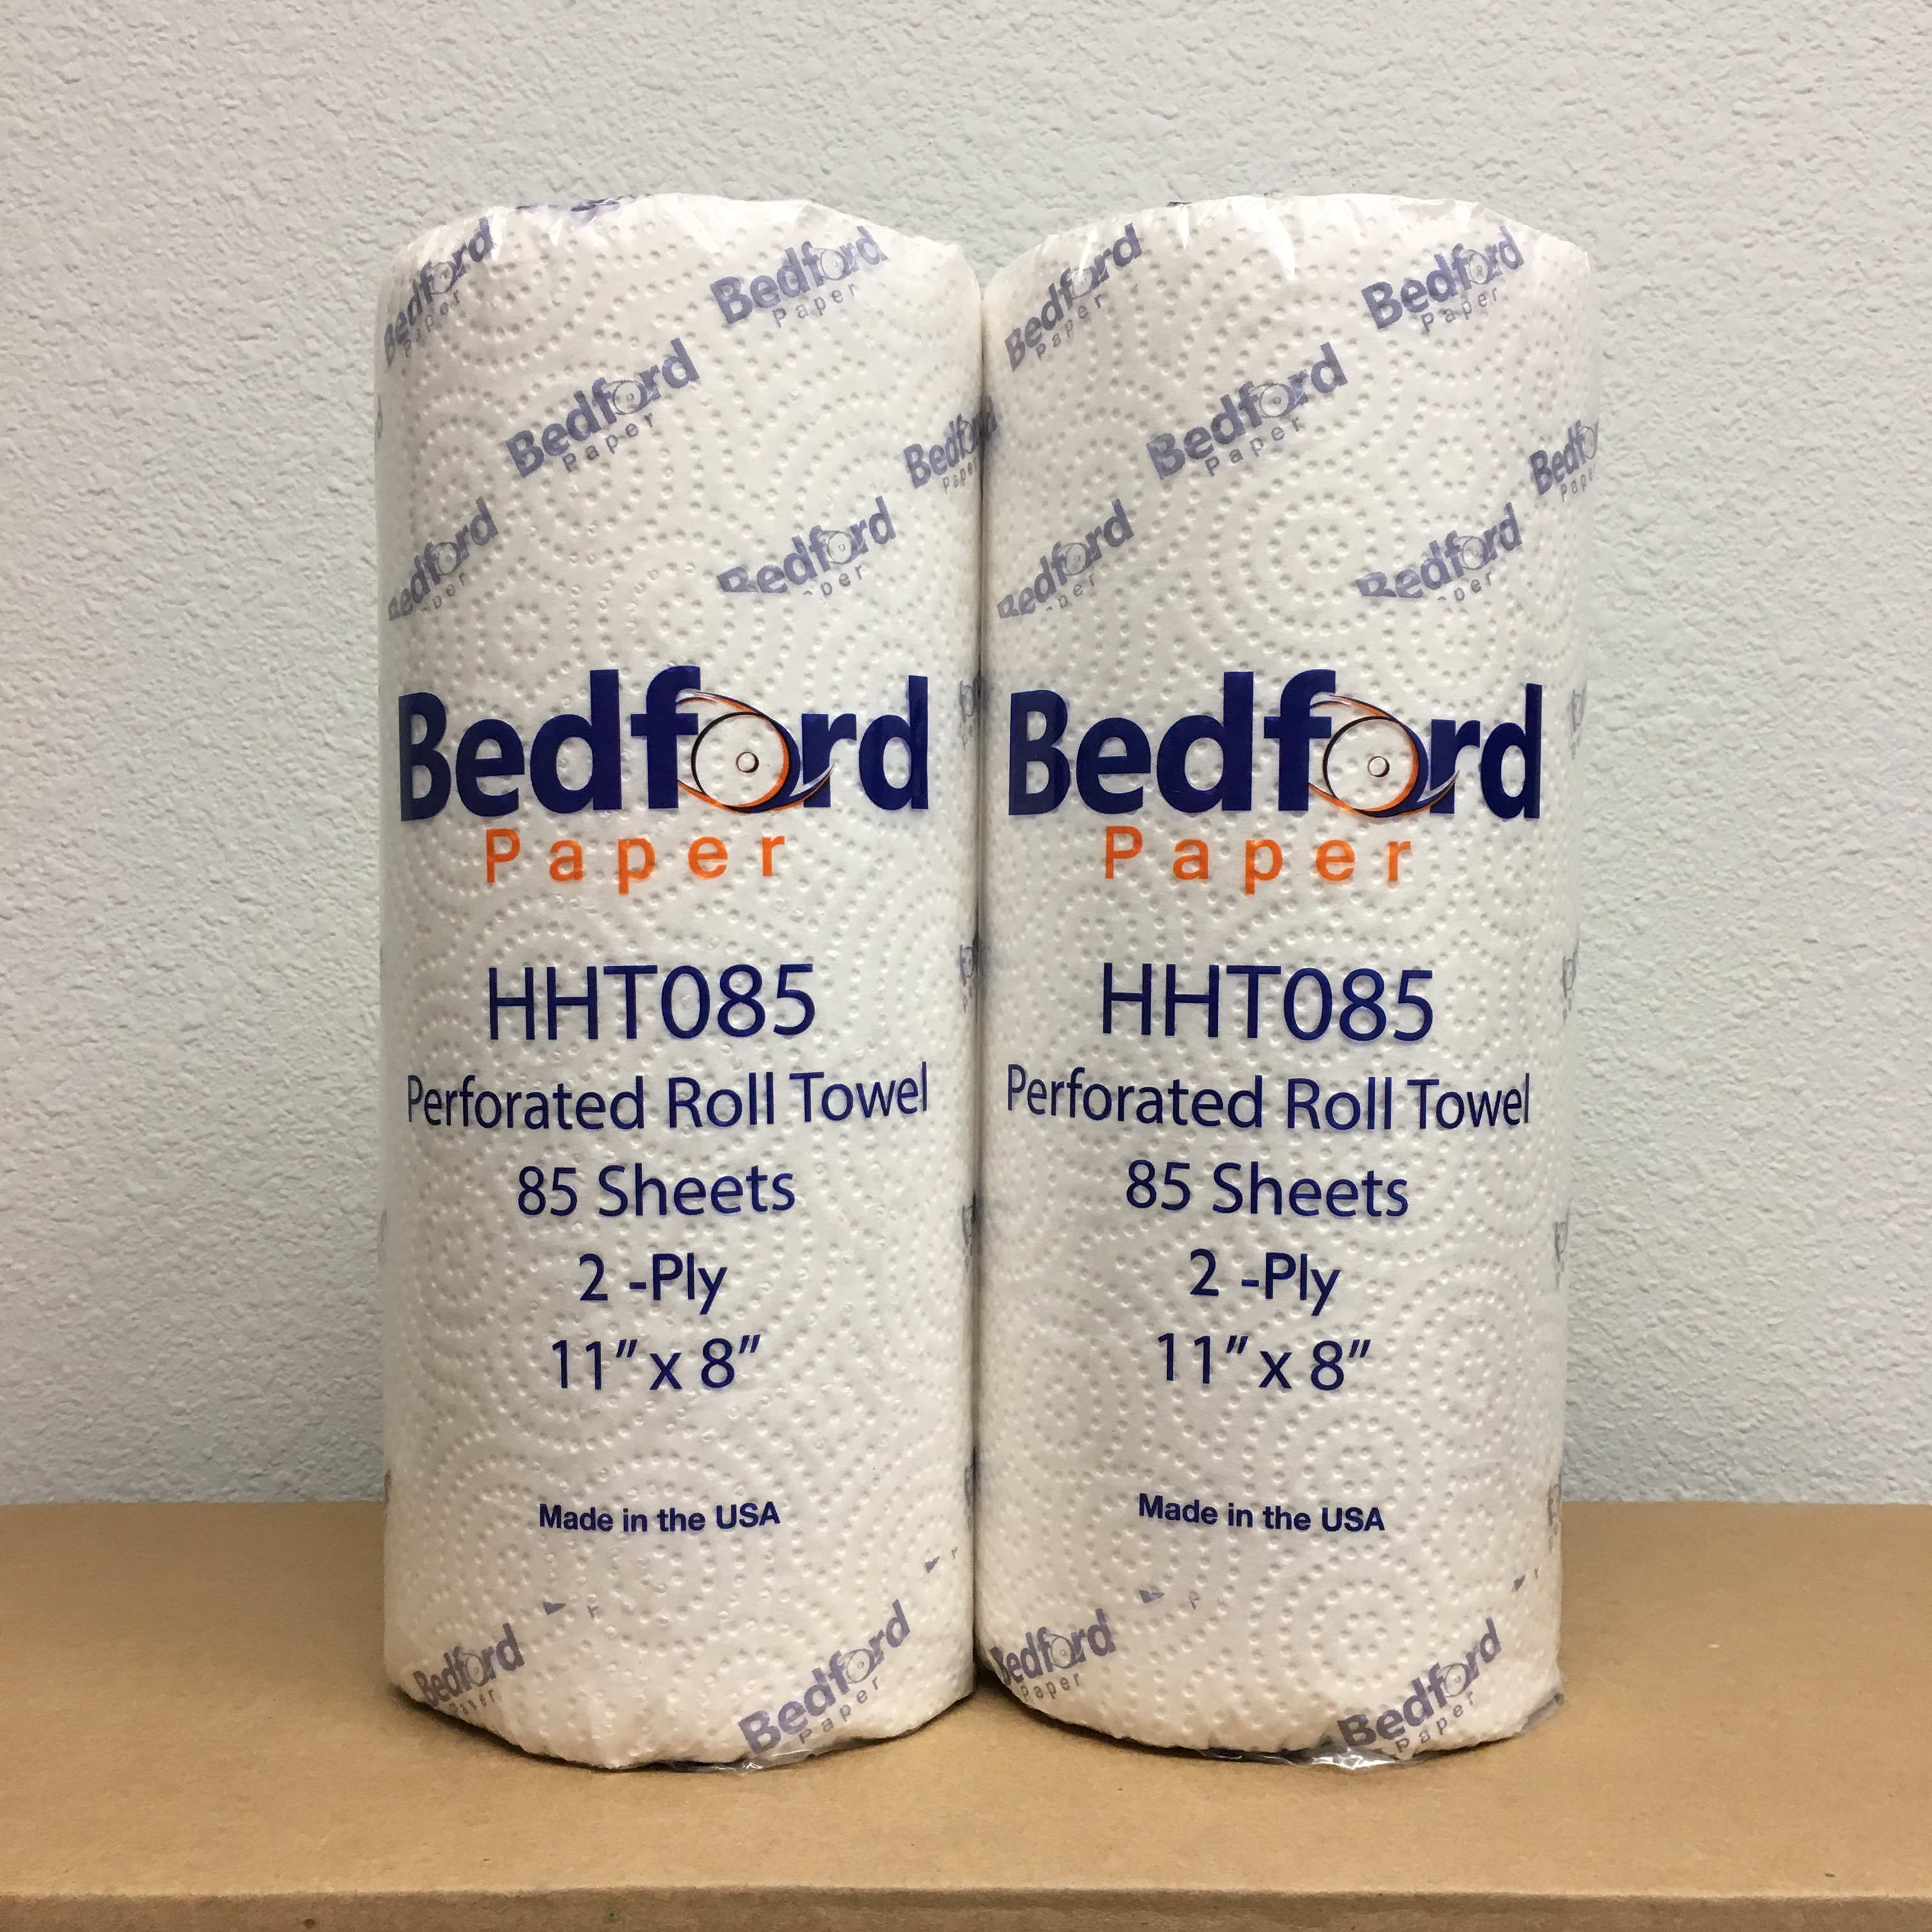 KITCHEN ROLL TOWEL BEDFORD
11 X 8 30 ROLLS OF 85 SHEETS
PER CASE